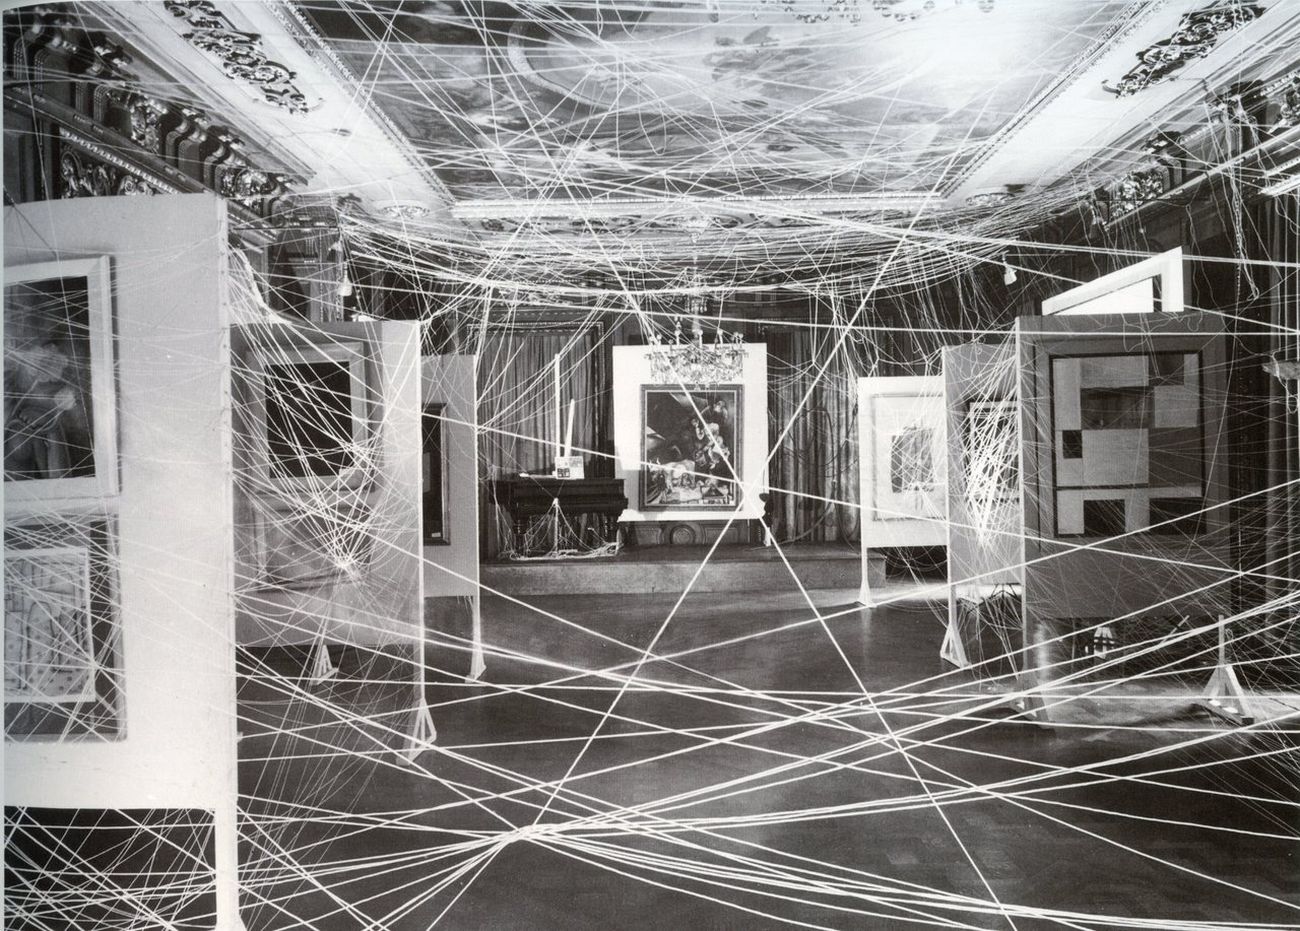 First Papers of Surrealism. Installation view at The Art of This Century Gallery, New York 1942. Marcel Duchamp, His Twine. Photo John D. Schiff